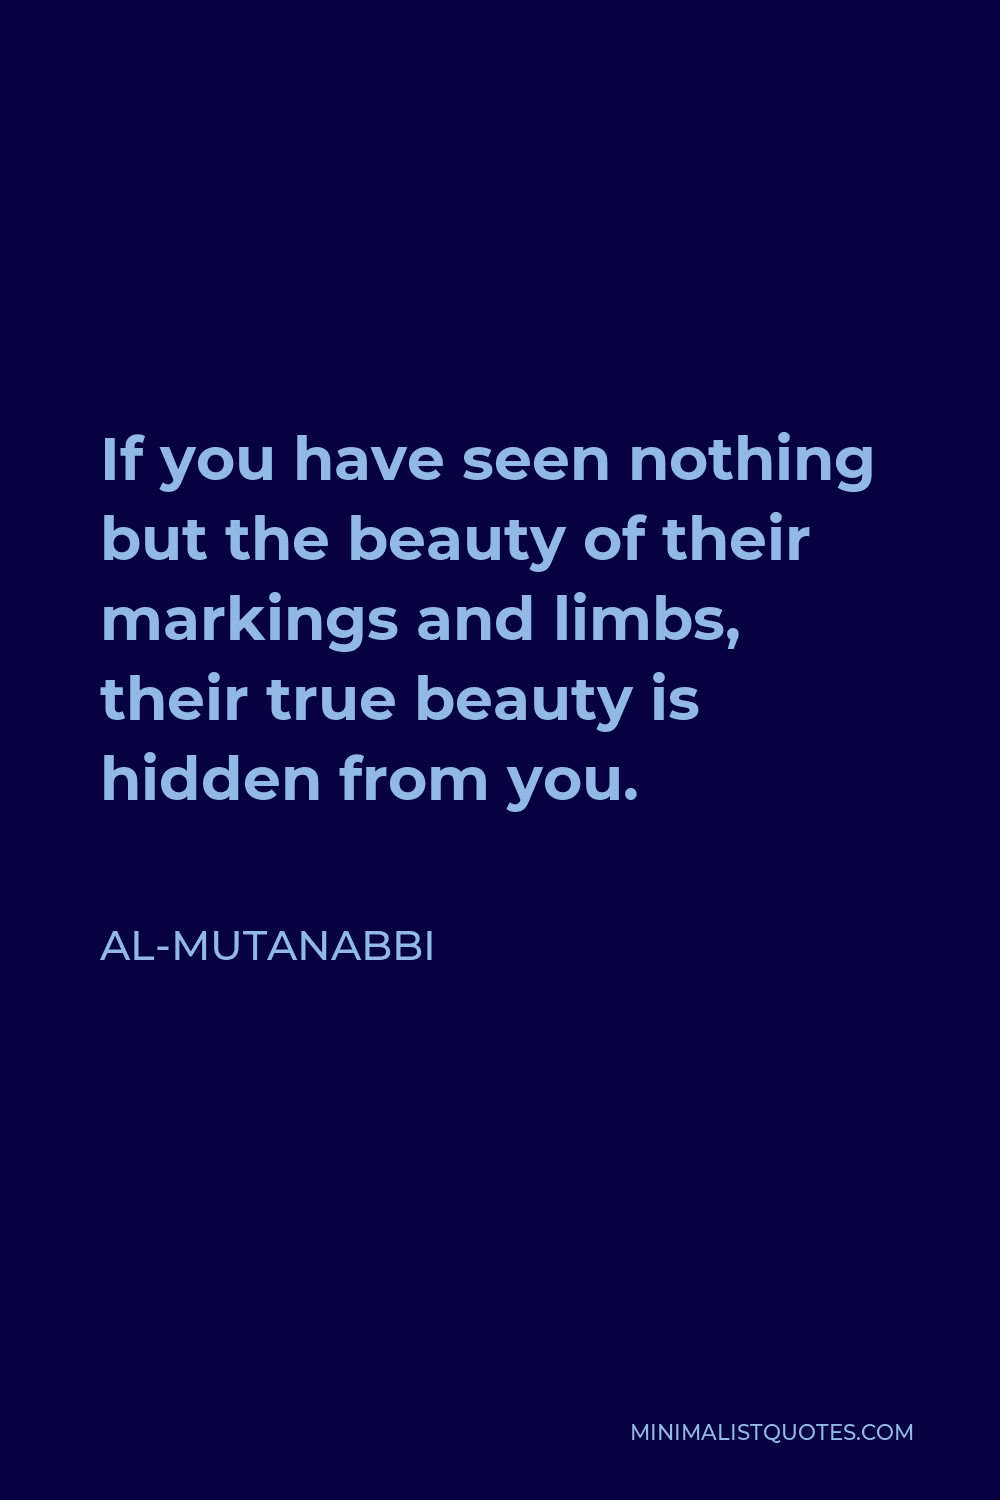 Al-Mutanabbi Quote - If you have seen nothing but the beauty of their markings and limbs, their true beauty is hidden from you.